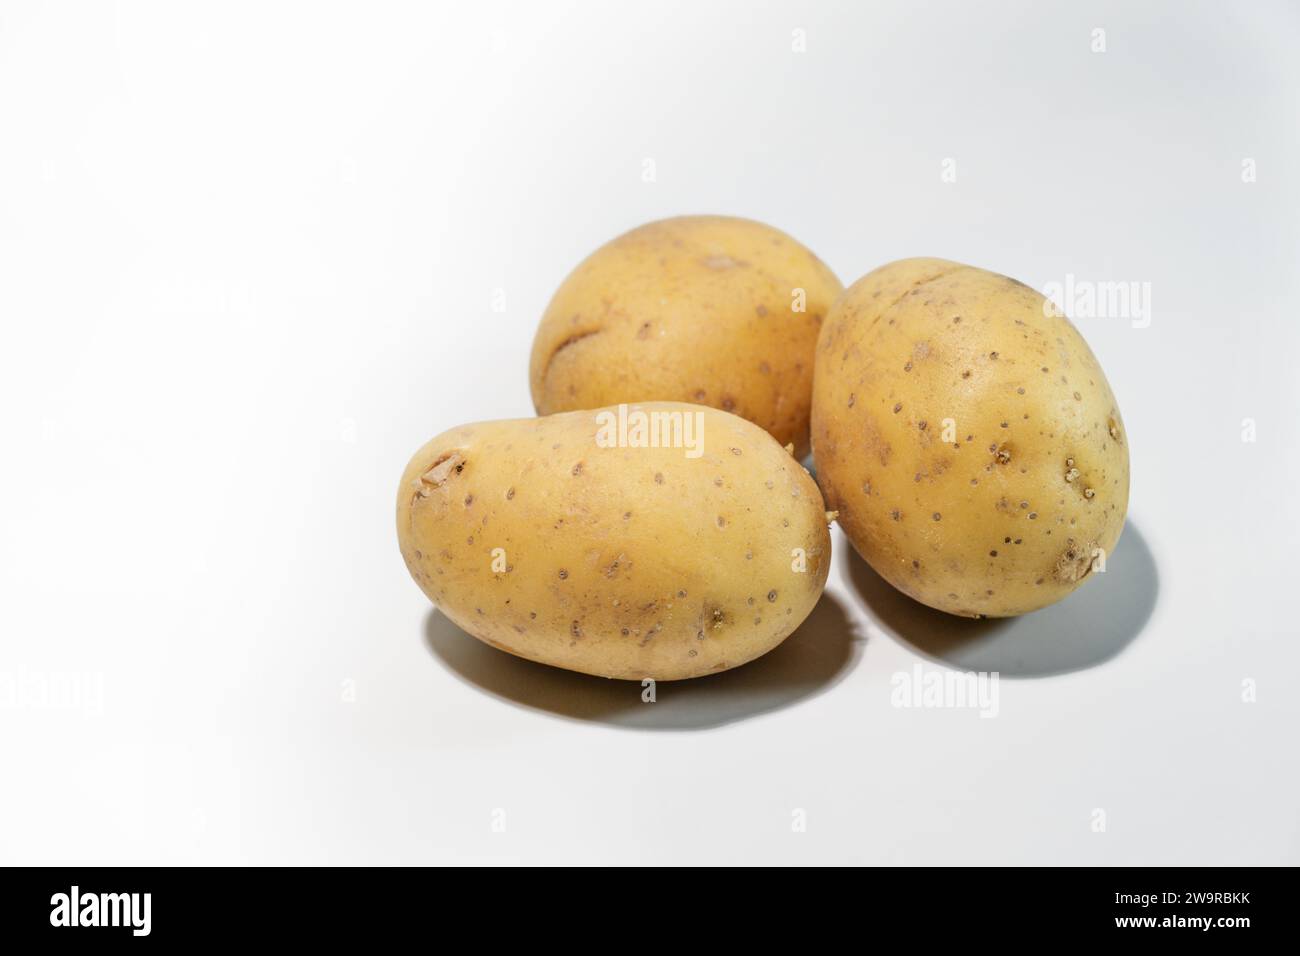 Three raw potatoes on a light gray background, carbohydrate-containing root vegetable and staple food in many parts of the world, copy space, selected Stock Photo